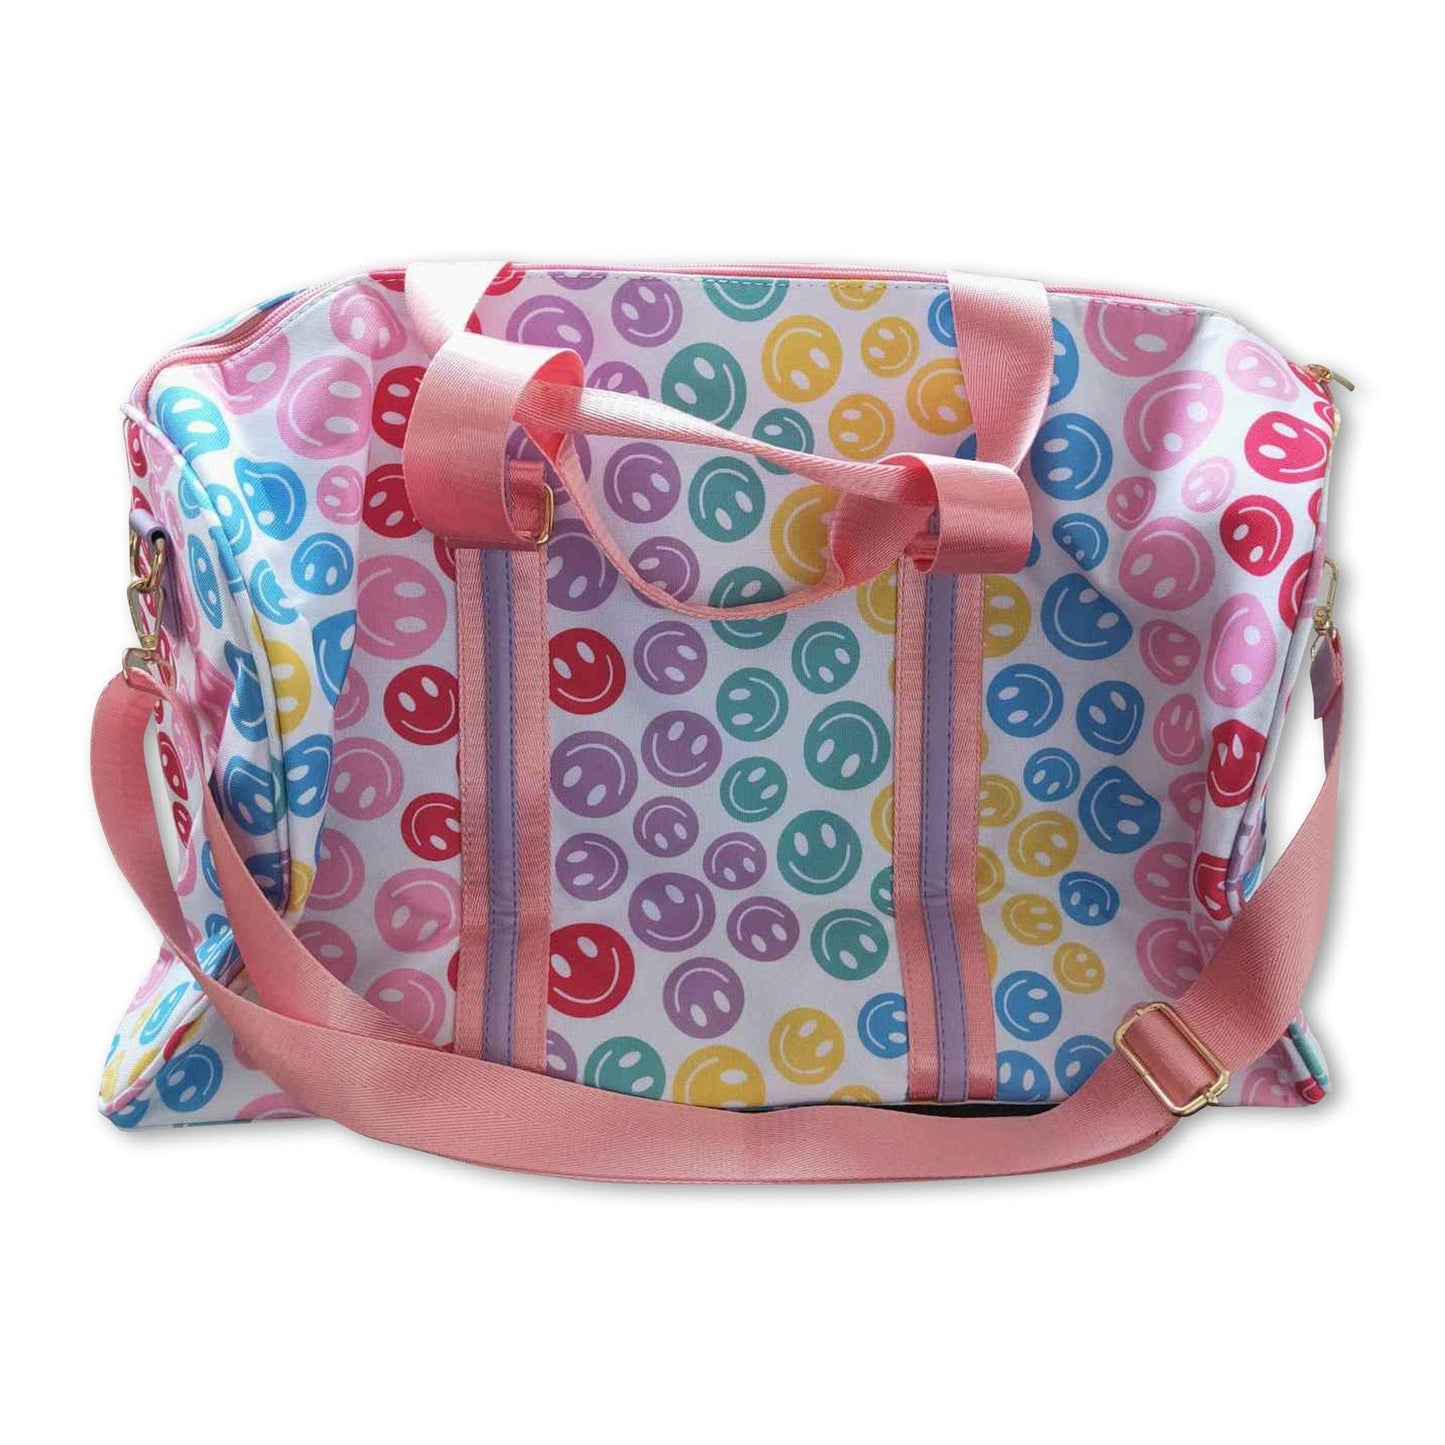 Smiley Girls Bags